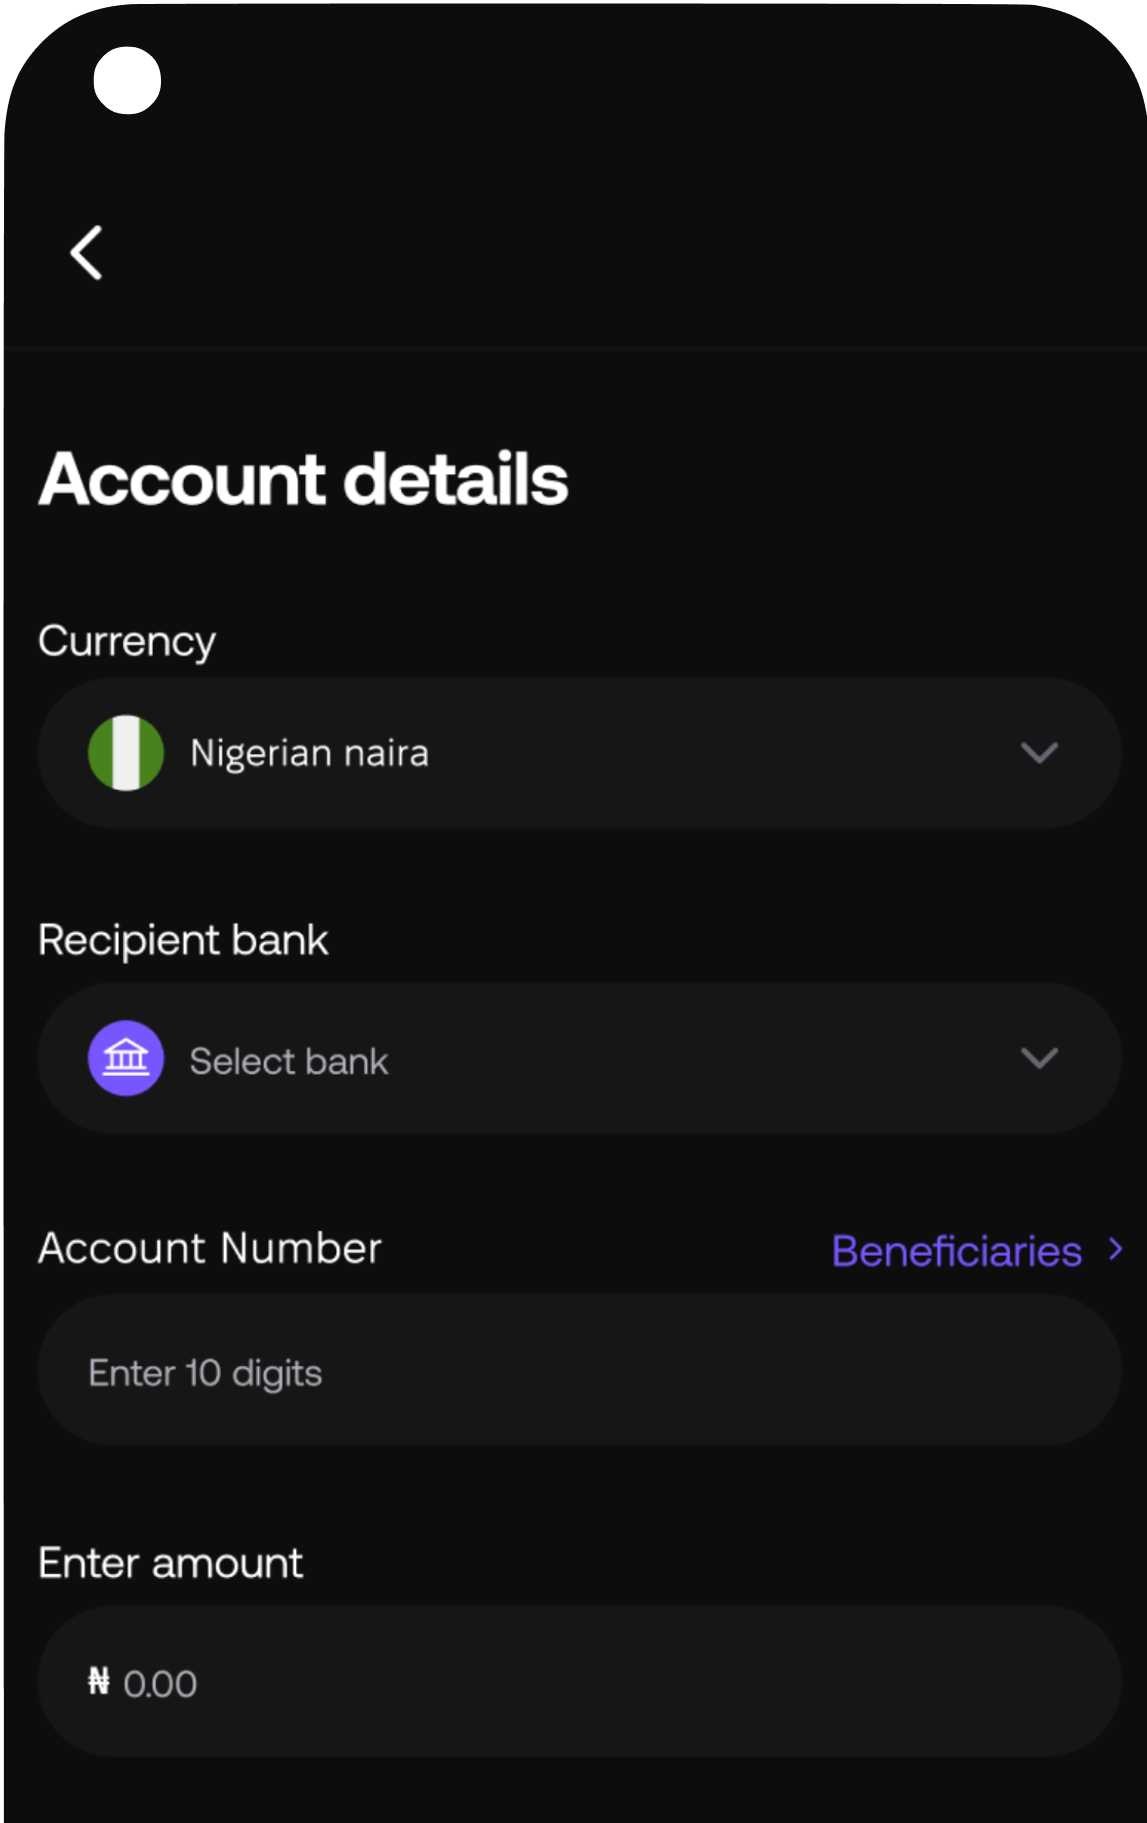 Send or receive money from any Nigerian bank.